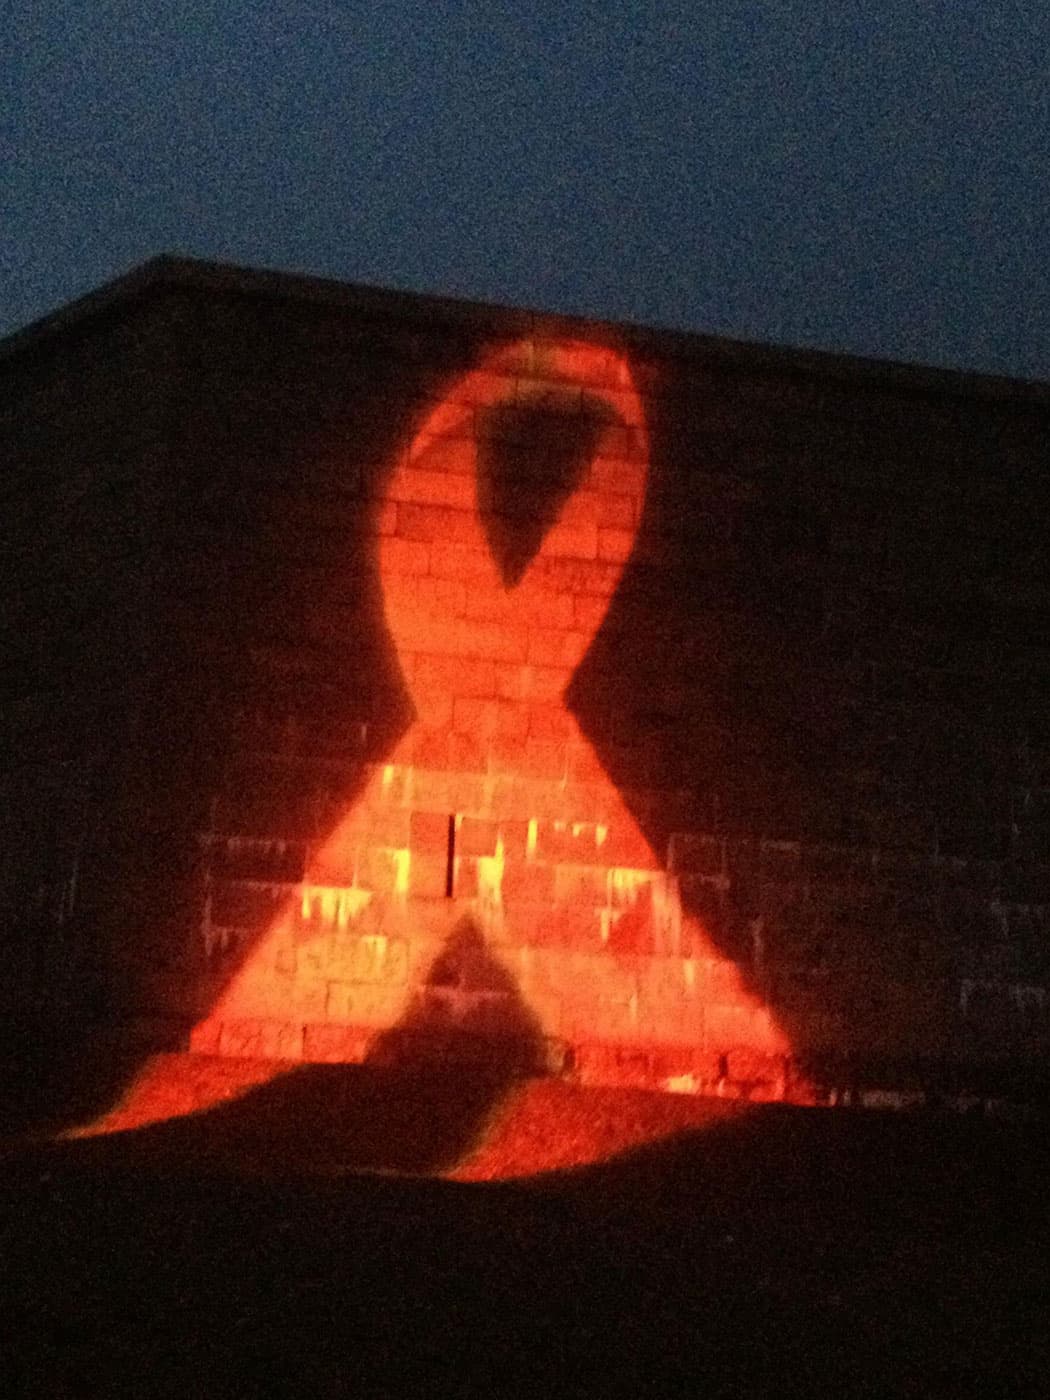 At last December’s “Medicine Wheel,” the iconic red AIDS ribbon was projected onto Fort Independence in South Boston. (Courtesy)